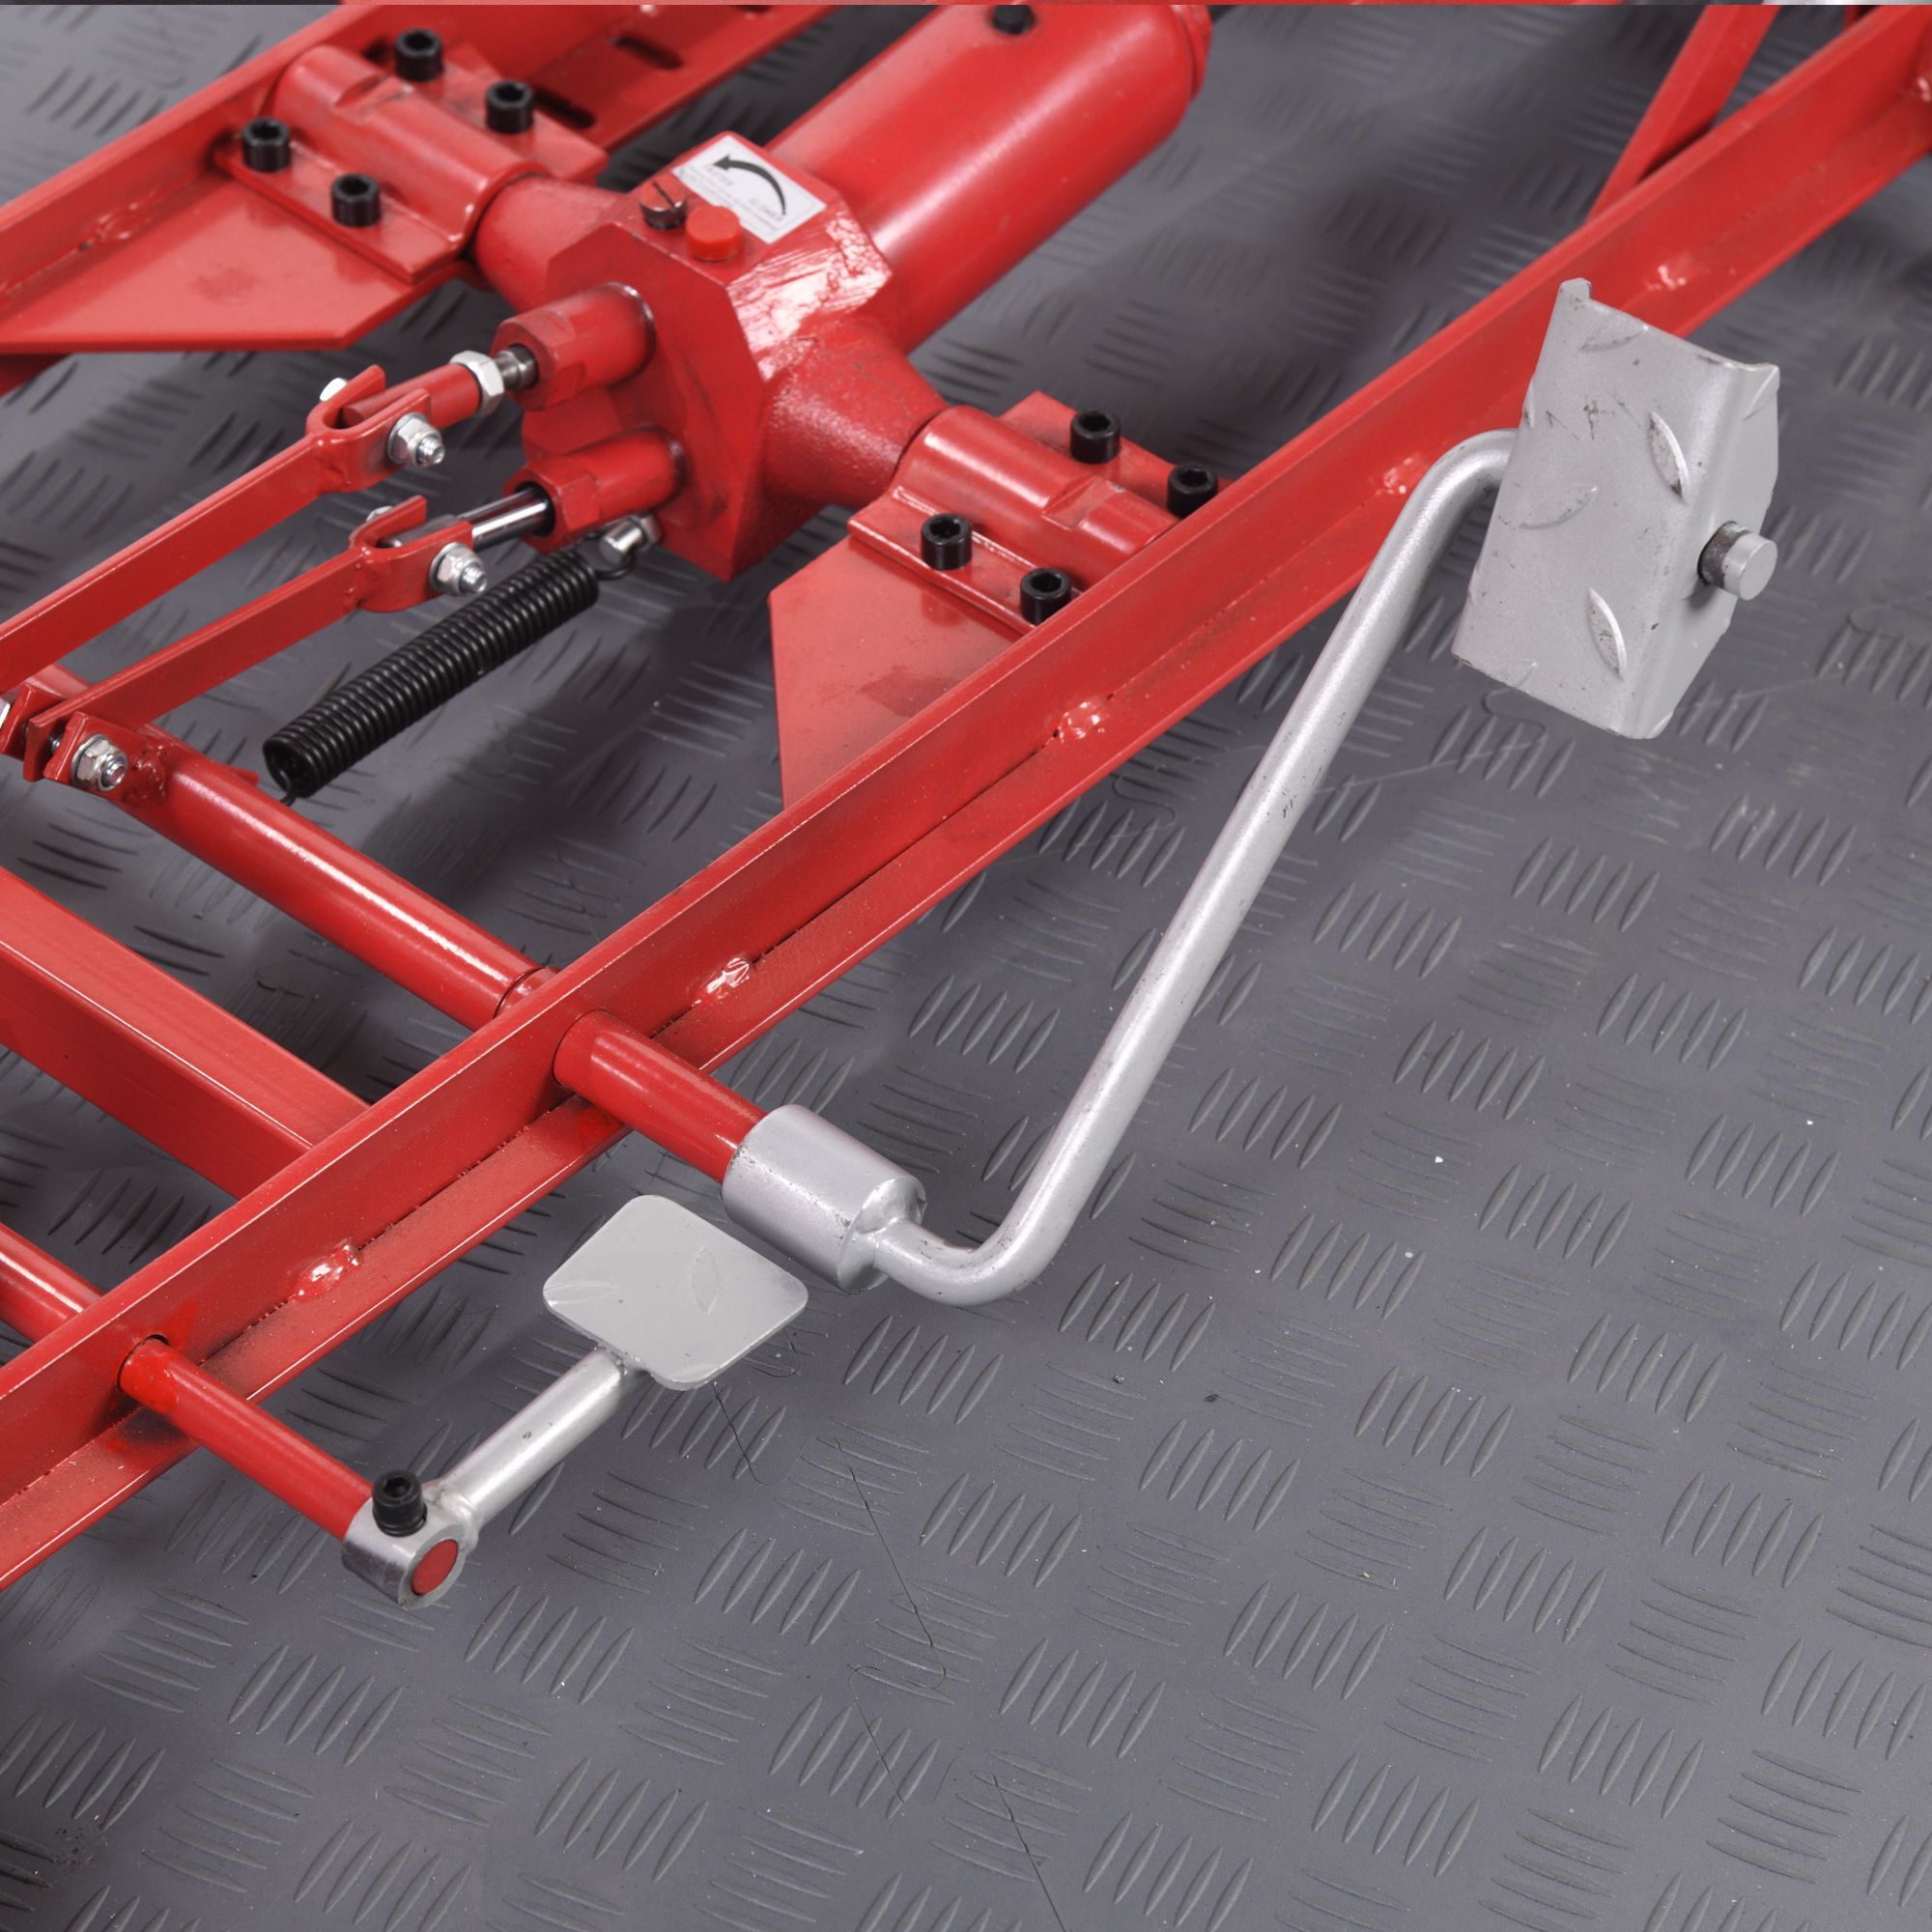 Load image into Gallery viewer, BikeTek Motorcycle Hydraulic Table Lift
